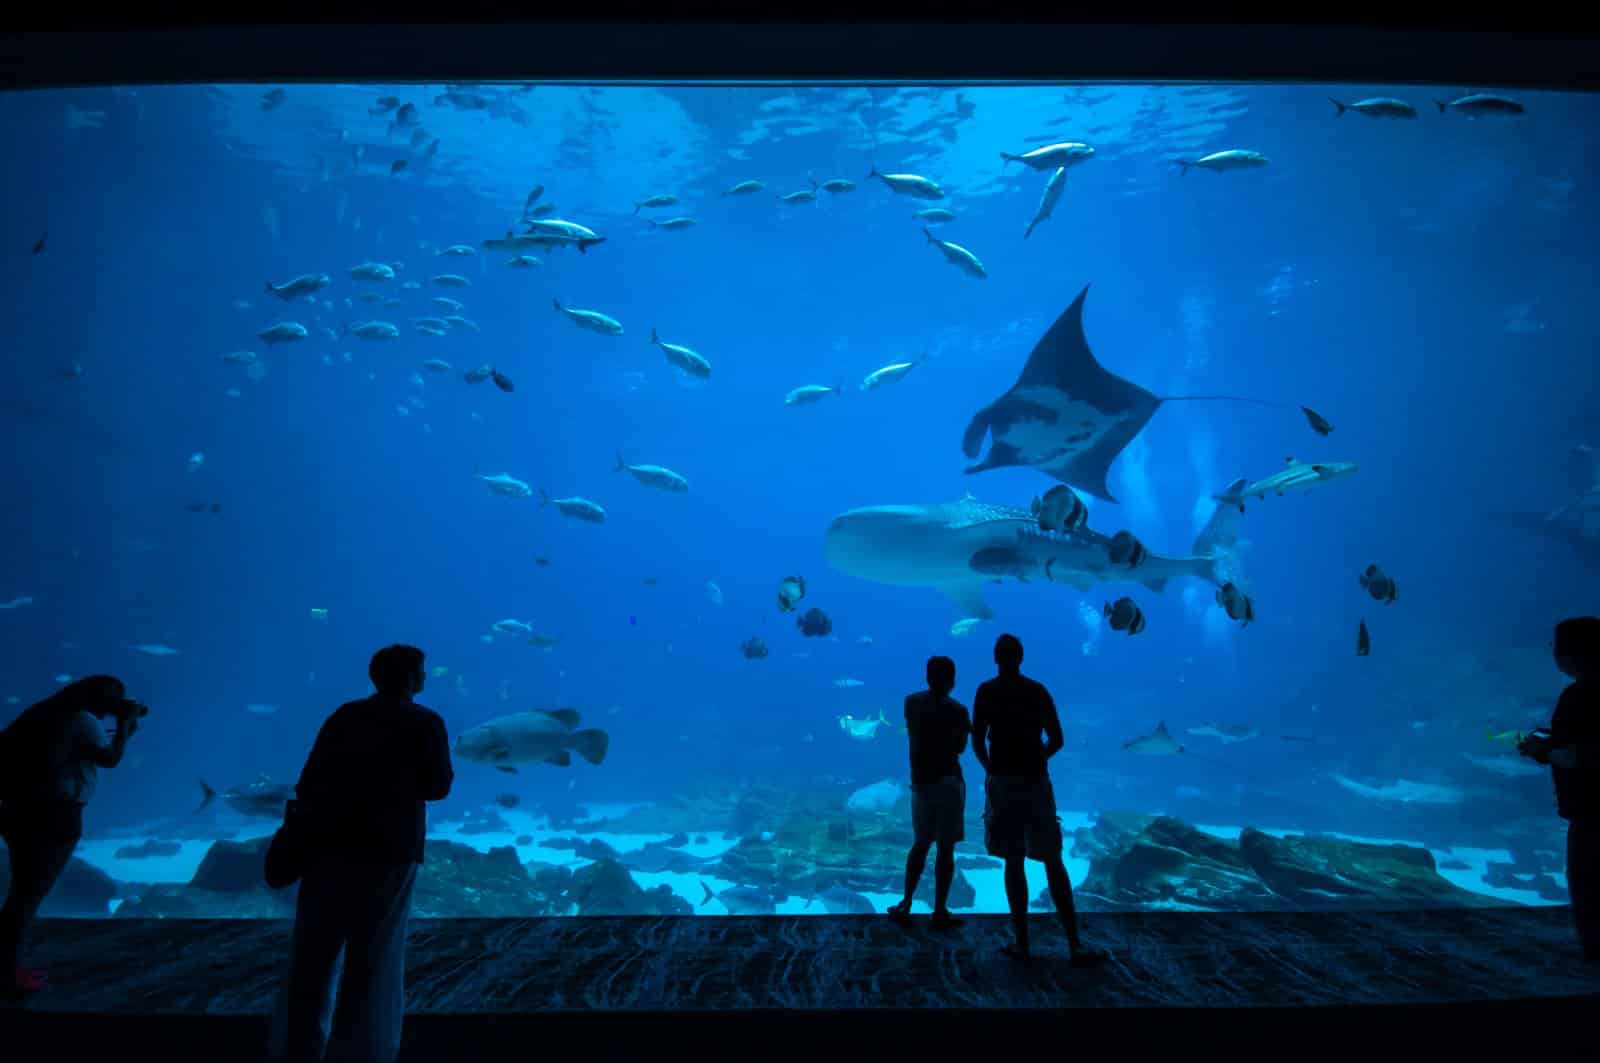 <p>Georgia, with attractions like the Georgia Aquarium, sees tourism revenues nearing $68.9 billion. Admission to the aquarium can cost over $35 for adults.</p>